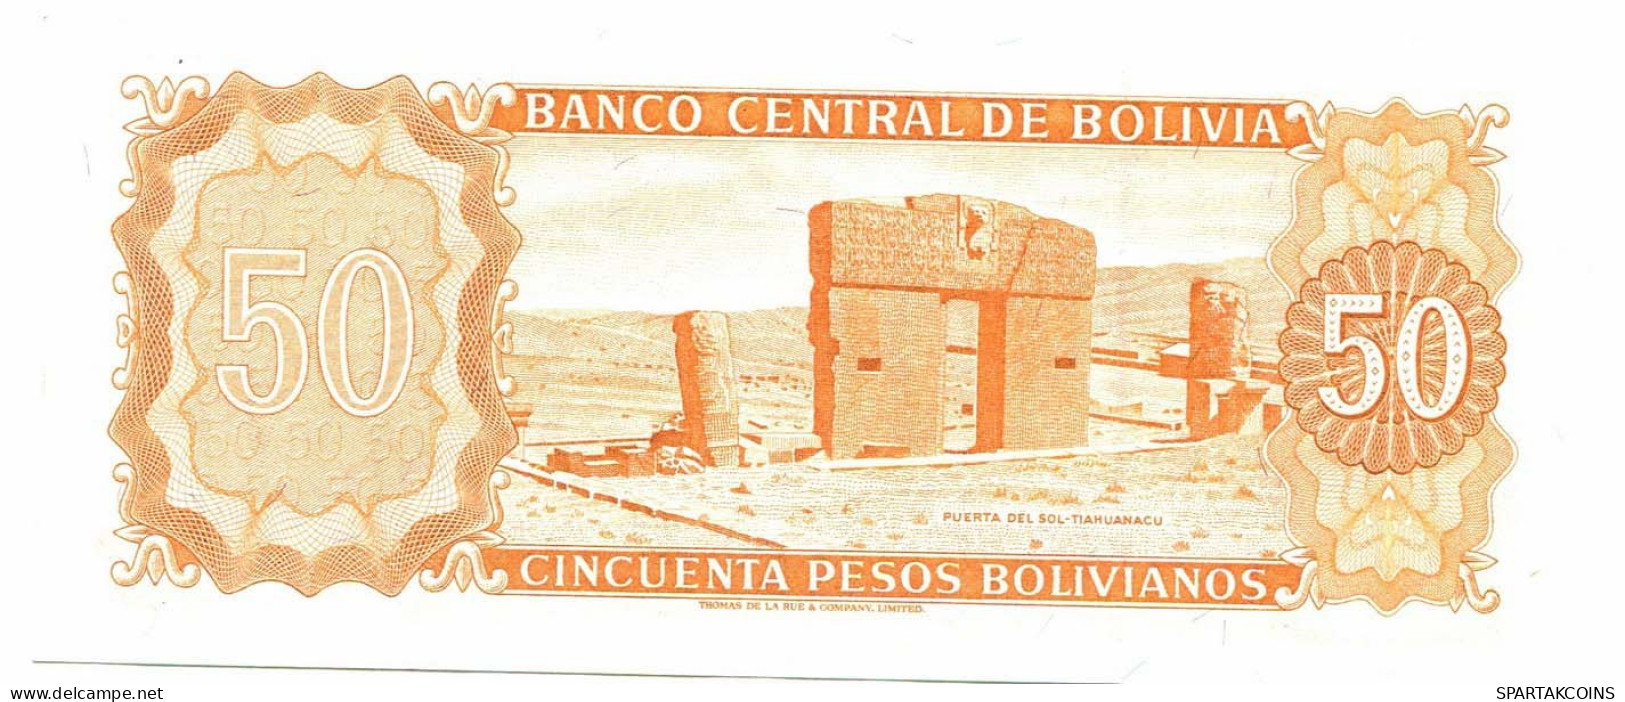 BOLIVIA 50 PESOS BOLIVIANOS 1962 AUNC Paper Money Banknote #P10800.4 - [11] Local Banknote Issues